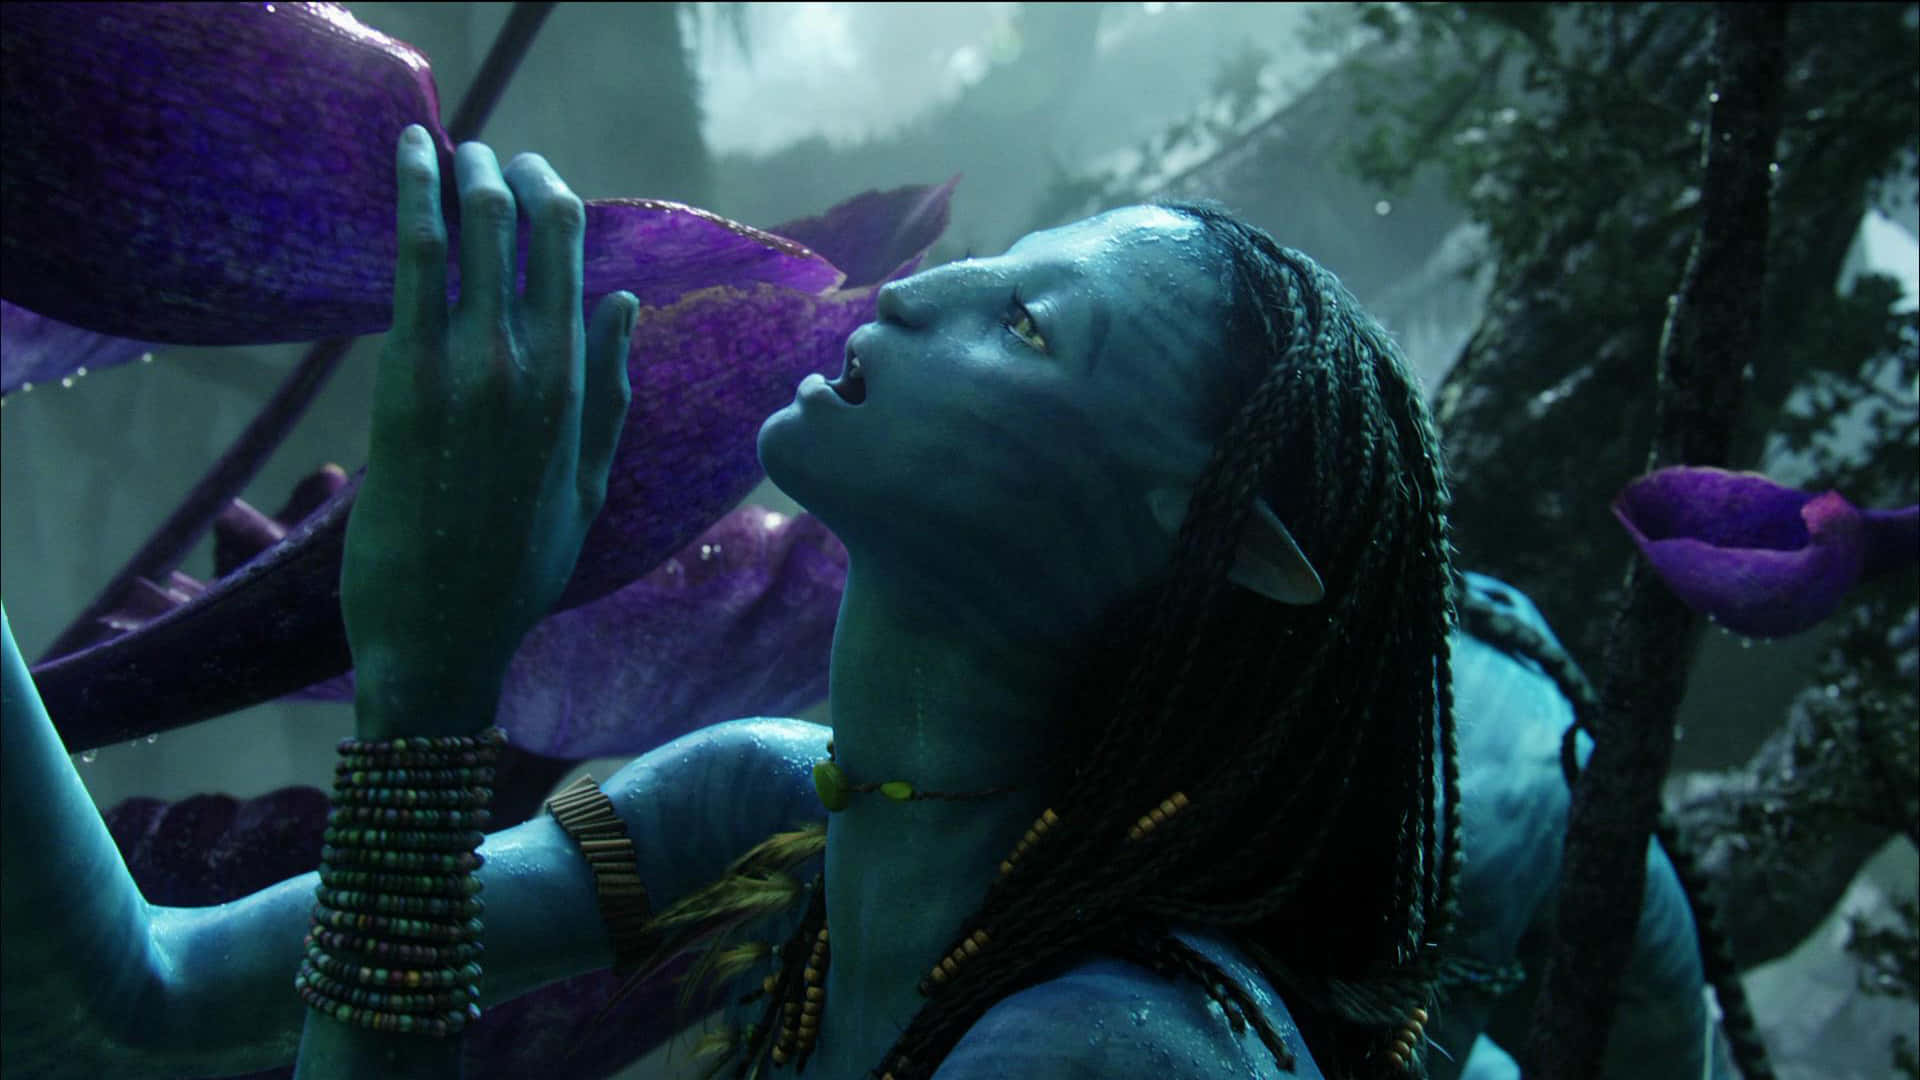 A scene from Avatar - "You Don't Dream in Cryo"